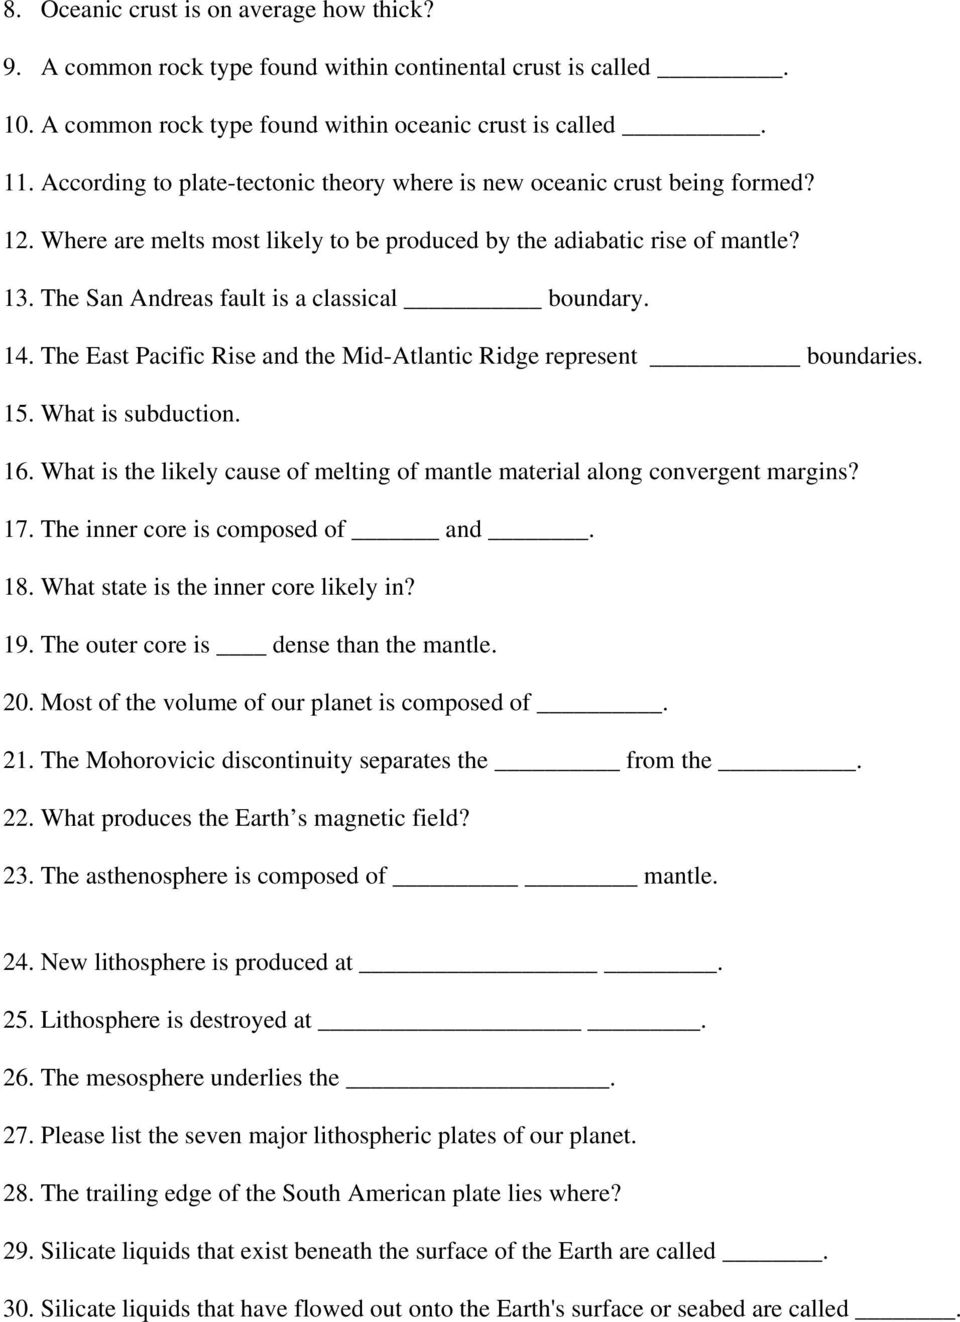 Plate Tectonics Practice Questions and Answers Revised August PDF Inside Plate Tectonics Worksheet Answers